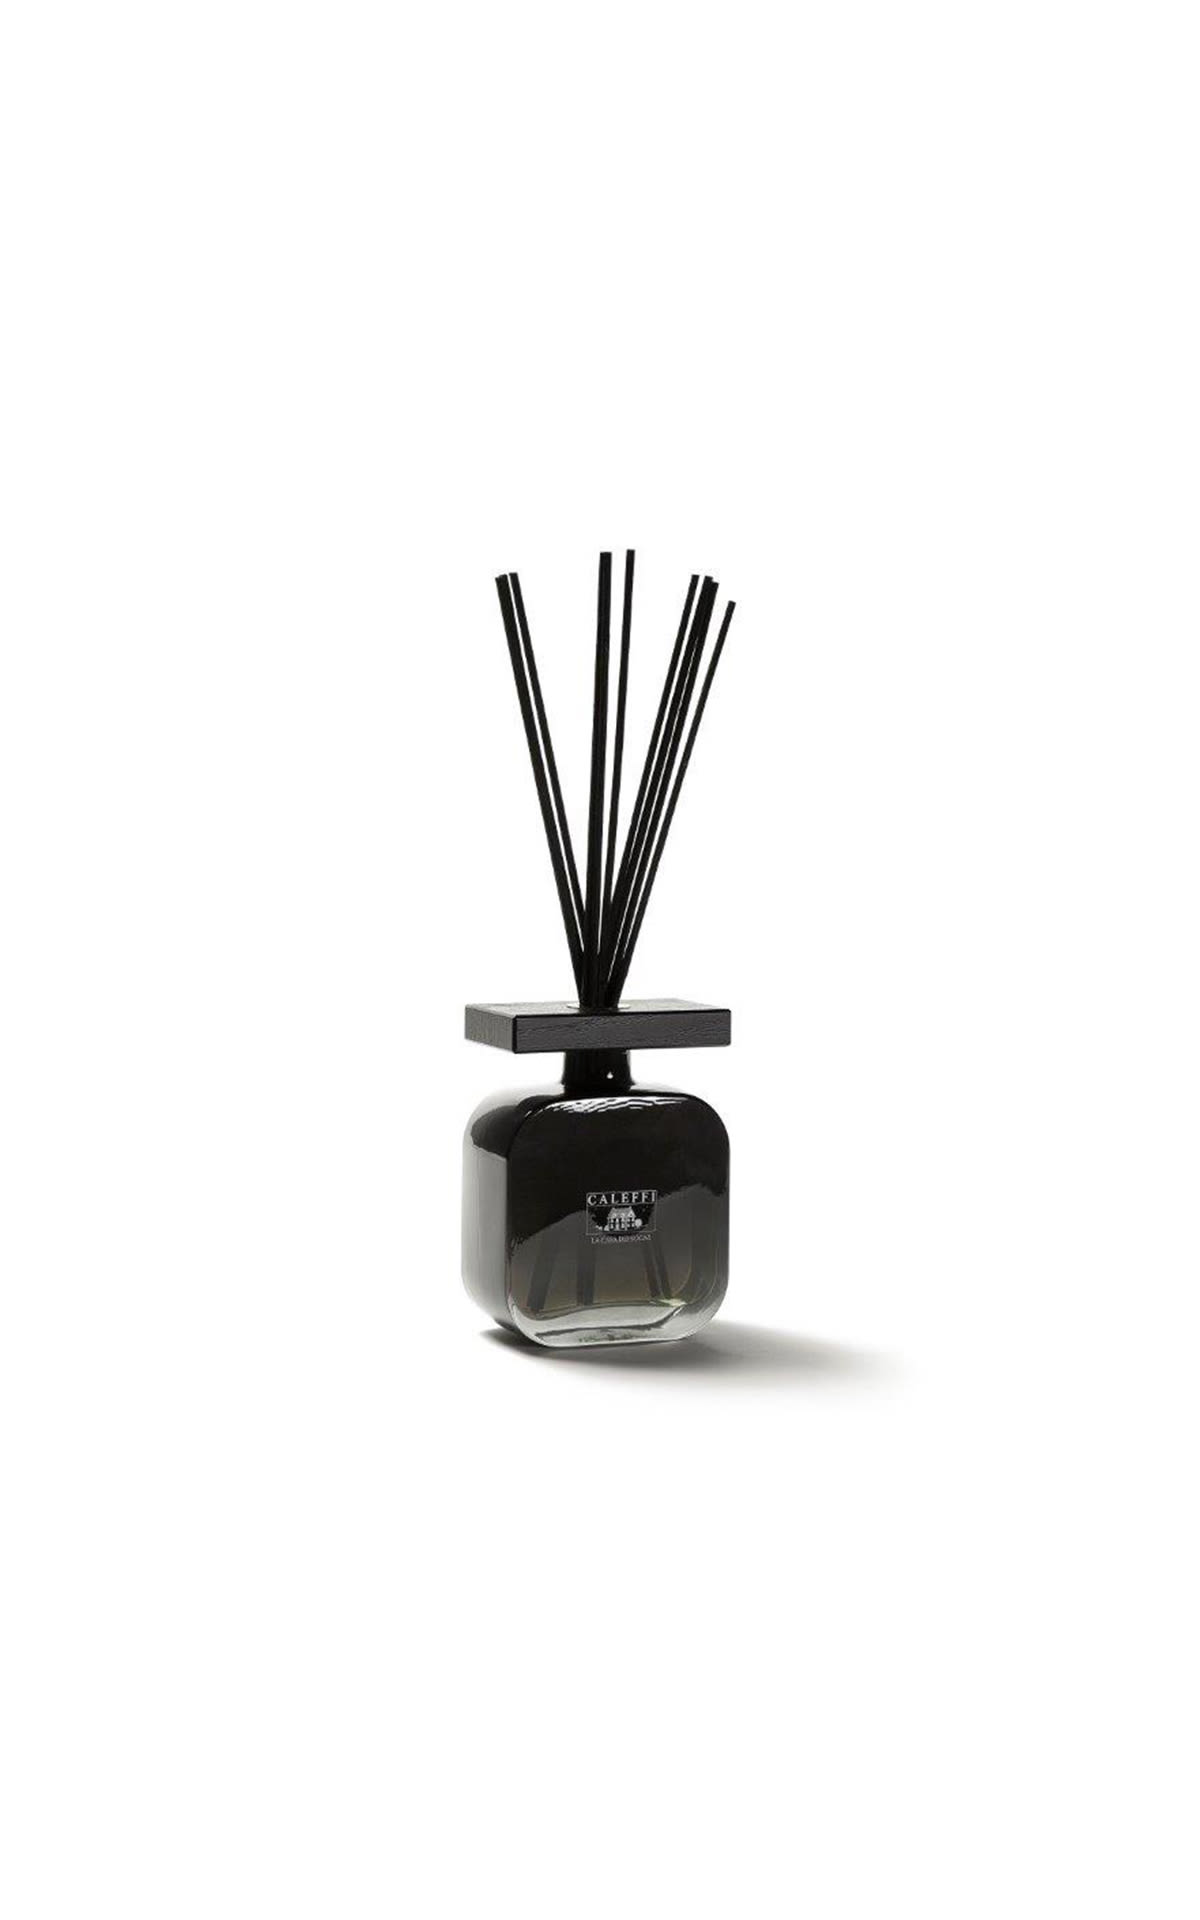 Home fragrance diffuser with sticks